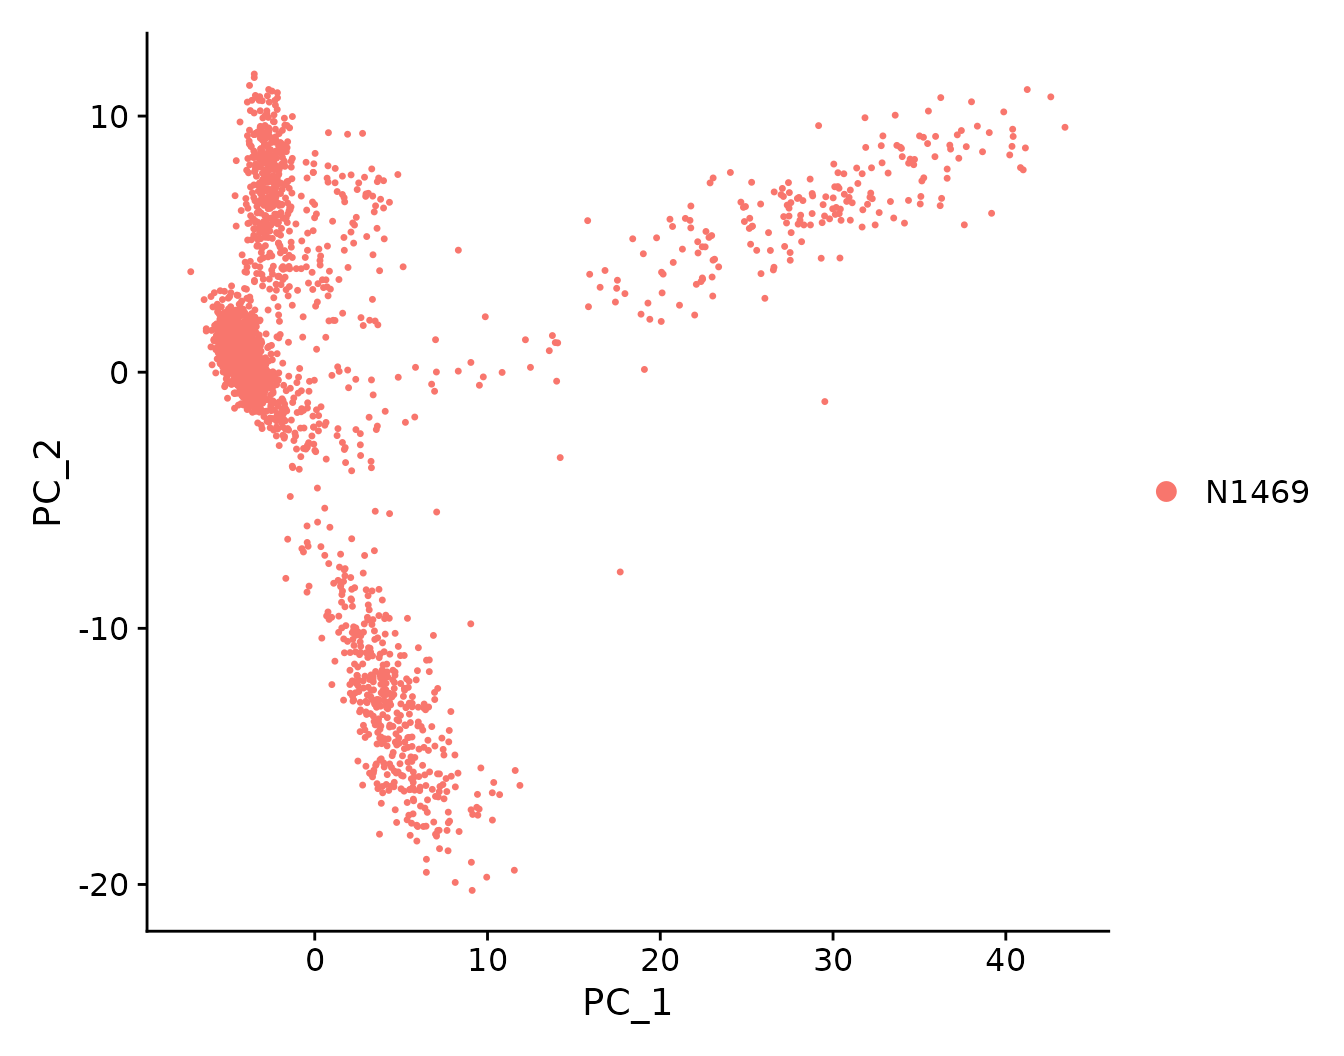 PCA plot showing the first two principal components of the data.